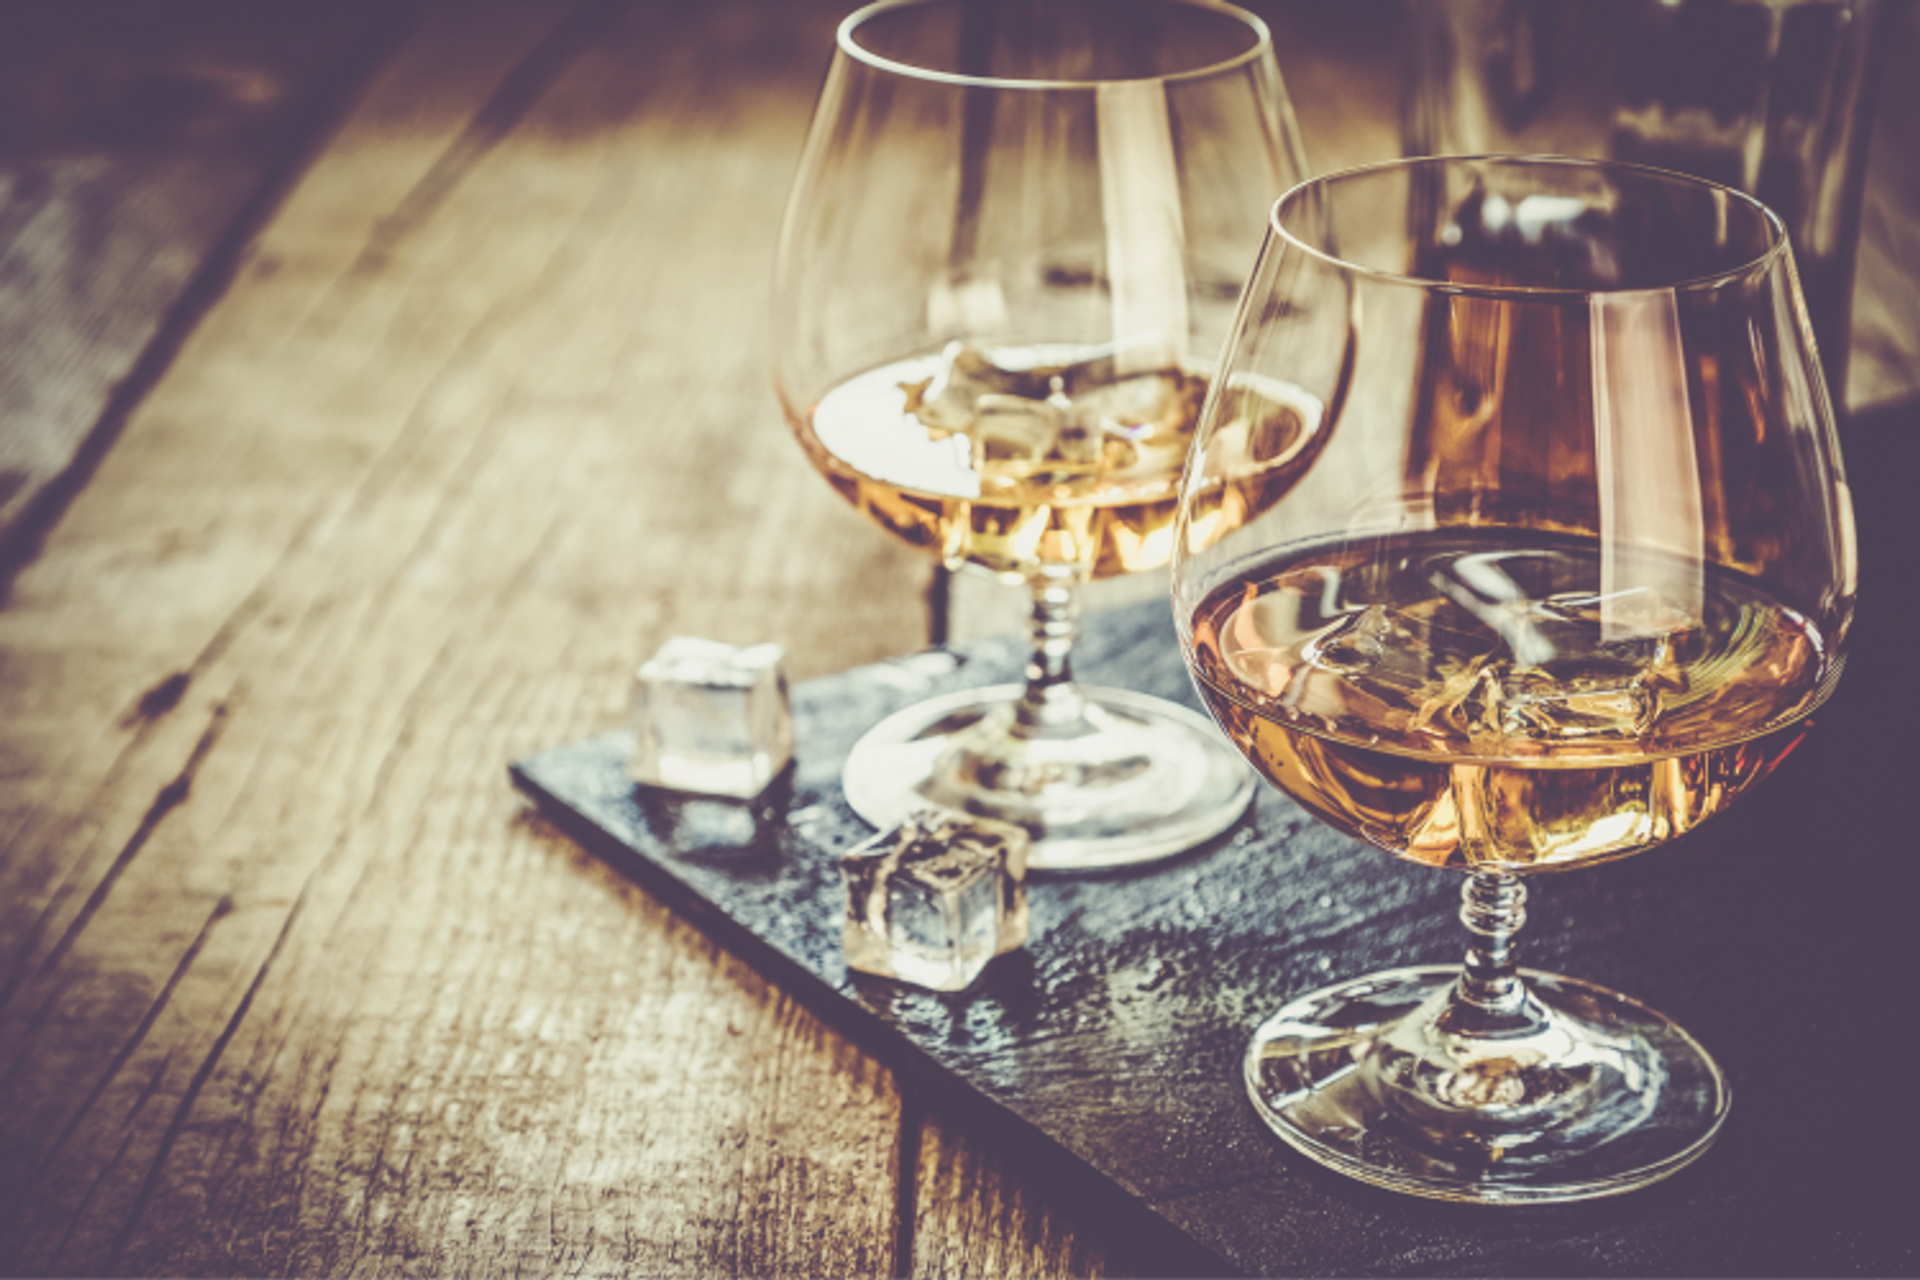 An image of two glasses of whisky on ice, on a wooden table.